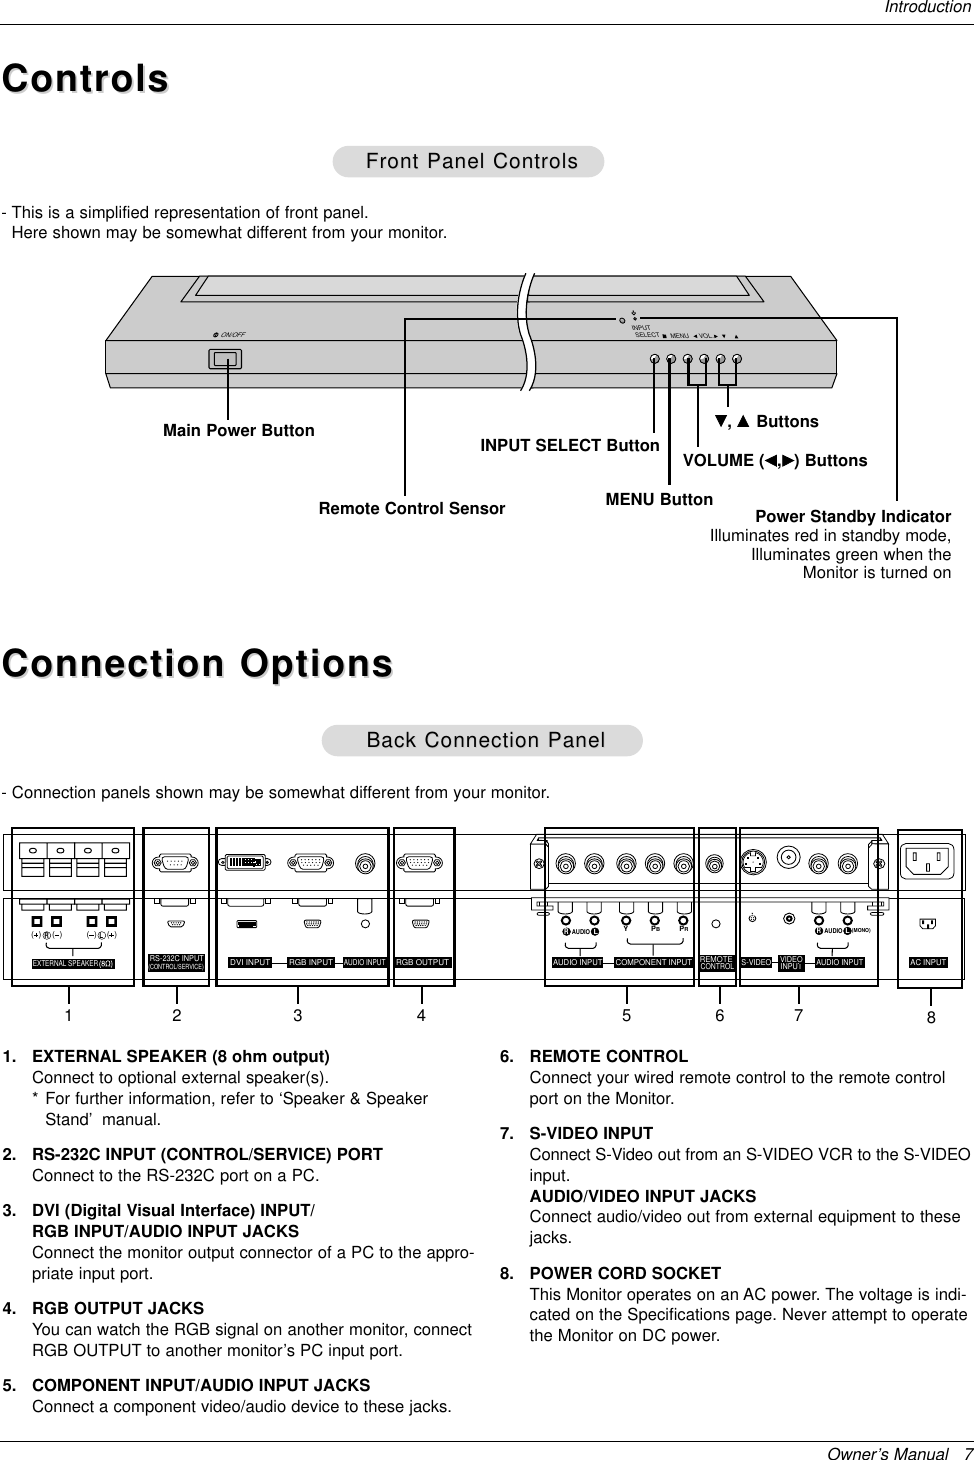 Owner’s Manual   7IntroductionControlsControlsConnection OptionsConnection OptionsR(  )(  )(  )(  )LVIDEOINPUTRS-232C INPUT(CONTROL/SERVICE)EXTERNAL SPEAKERYPBPR(MONO)RAUDIOLRAUDIOLS-VIDEOAC INPUTAUDIO INPUTAUDIO INPUTAUDIO INPUTREMOTECONTROLCOMPONENT INPUTDVI INPUT RGB INPUT RGB OUTPUT11. EXTERNAL SPEAKER (8 ohm output)Connect to optional external speaker(s).* For further information, refer to ‘Speaker &amp; SpeakerStand’manual.2. RS-232C INPUT (CONTROL/SERVICE) PORTConnect to the RS-232C port on a PC.3. DVI (Digital Visual Interface) INPUT/RGB INPUT/AUDIO INPUT JACKSConnect the monitor output connector of a PC to the appro-priate input port.4. RGB OUTPUT JACKSYou can watch the RGB signal on another monitor, connectRGB OUTPUT to another monitor’s PC input port.5. COMPONENT INPUT/AUDIO INPUT JACKSConnect a component video/audio device to these jacks.6. REMOTE CONTROLConnect your wired remote control to the remote controlport on the Monitor.7. S-VIDEO INPUTConnect S-Video out from an S-VIDEO VCR to the S-VIDEOinput.AUDIO/VIDEO INPUT JACKSConnect audio/video out from external equipment to thesejacks.8. POWER CORD SOCKETThis Monitor operates on an AC power. The voltage is indi-cated on the Specifications page. Never attempt to operatethe Monitor on DC power.Back Connection PanelBack Connection PanelFront Panel ControlsFront Panel Controls2 4 63 7 85VOL.MENUON/OFFINPUT SELECTMain Power Button INPUT SELECT Button VOLUME (F,G) ButtonsPower Standby IndicatorIlluminates red in standby mode,Illuminates green when theMonitor is turned onRemote Control Sensor MENU ButtonE, D Buttons- This is a simplified representation of front panel. Here shown may be somewhat different from your monitor.- Connection panels shown may be somewhat different from your monitor.